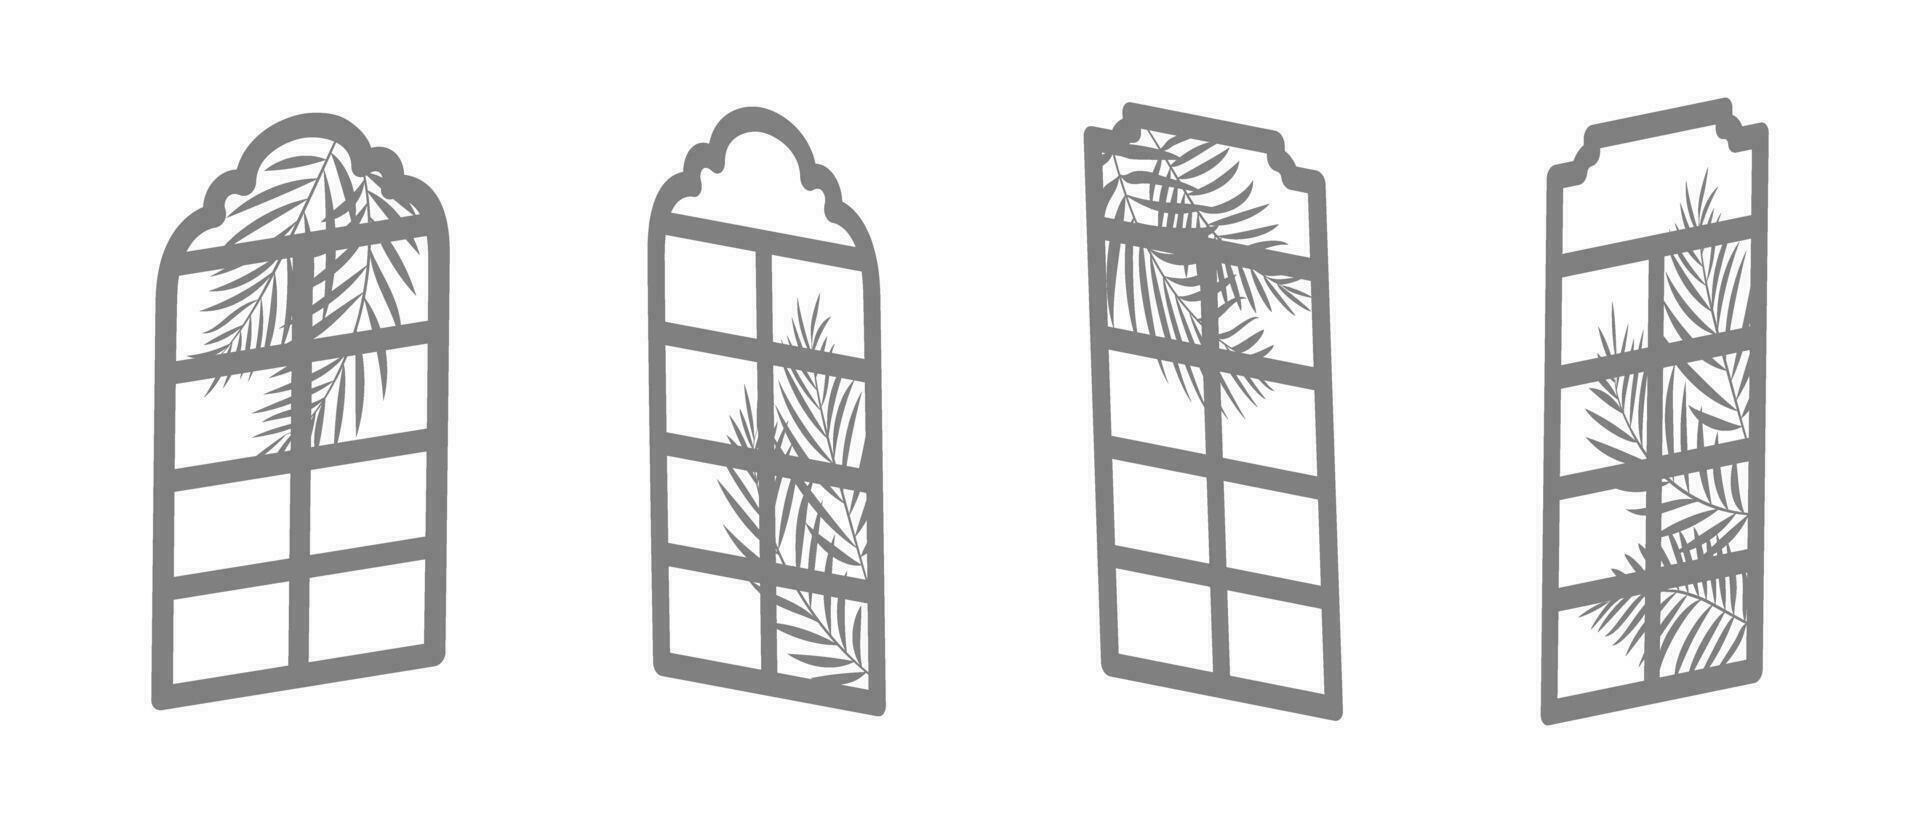 Different silhouette shapes of a window frame with palm leaves. Isolated islamic shape window shadow. Vector illustration.